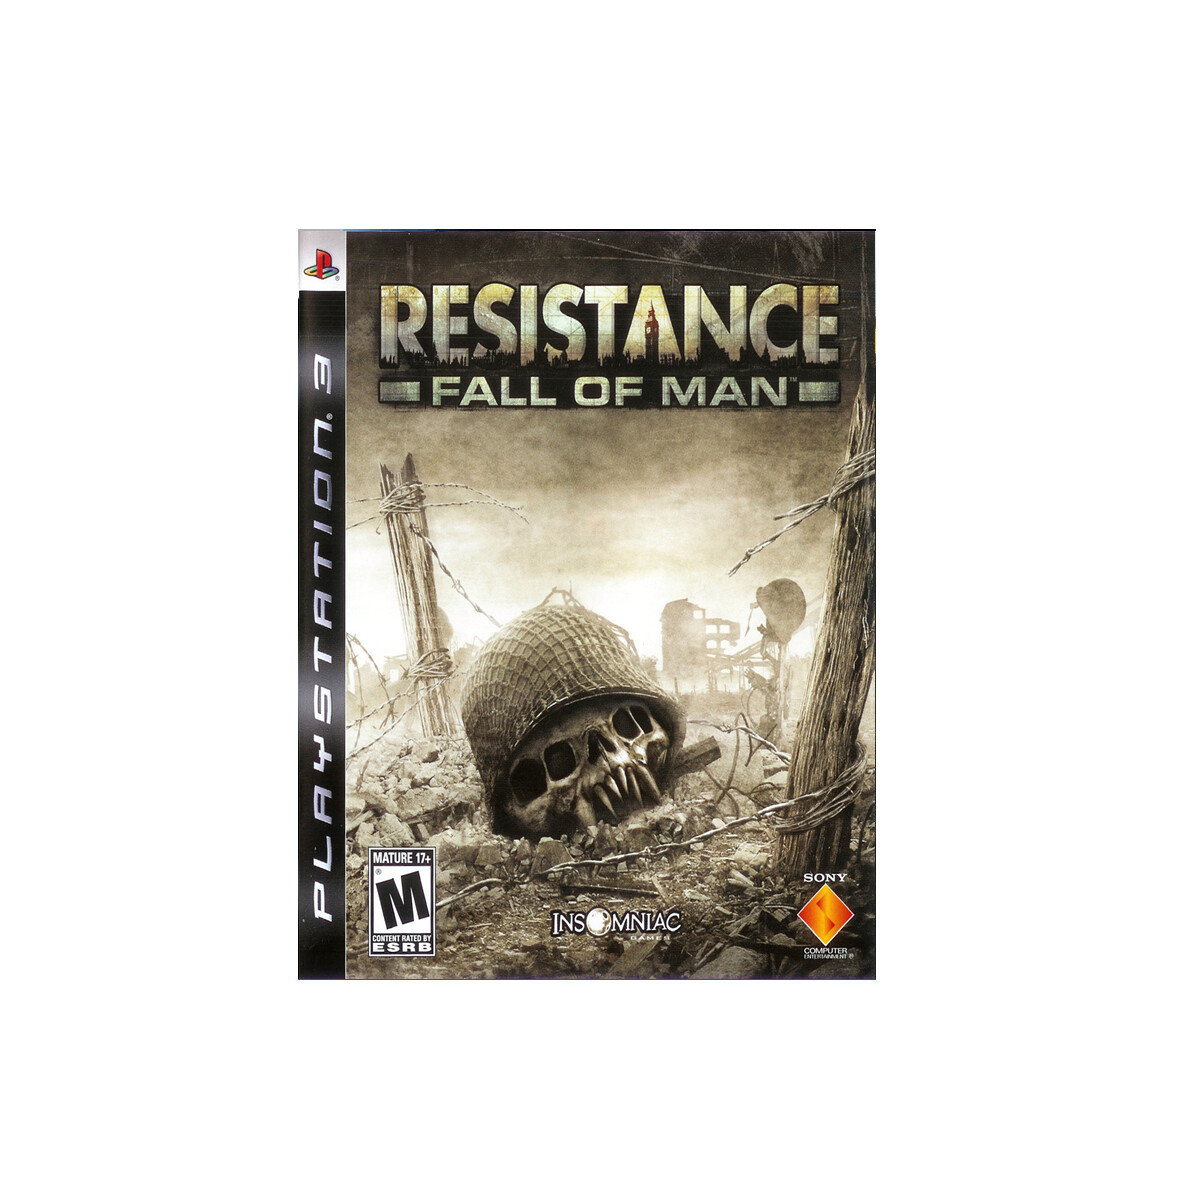 PS3 RESISTANCE: FALL OF MAN 